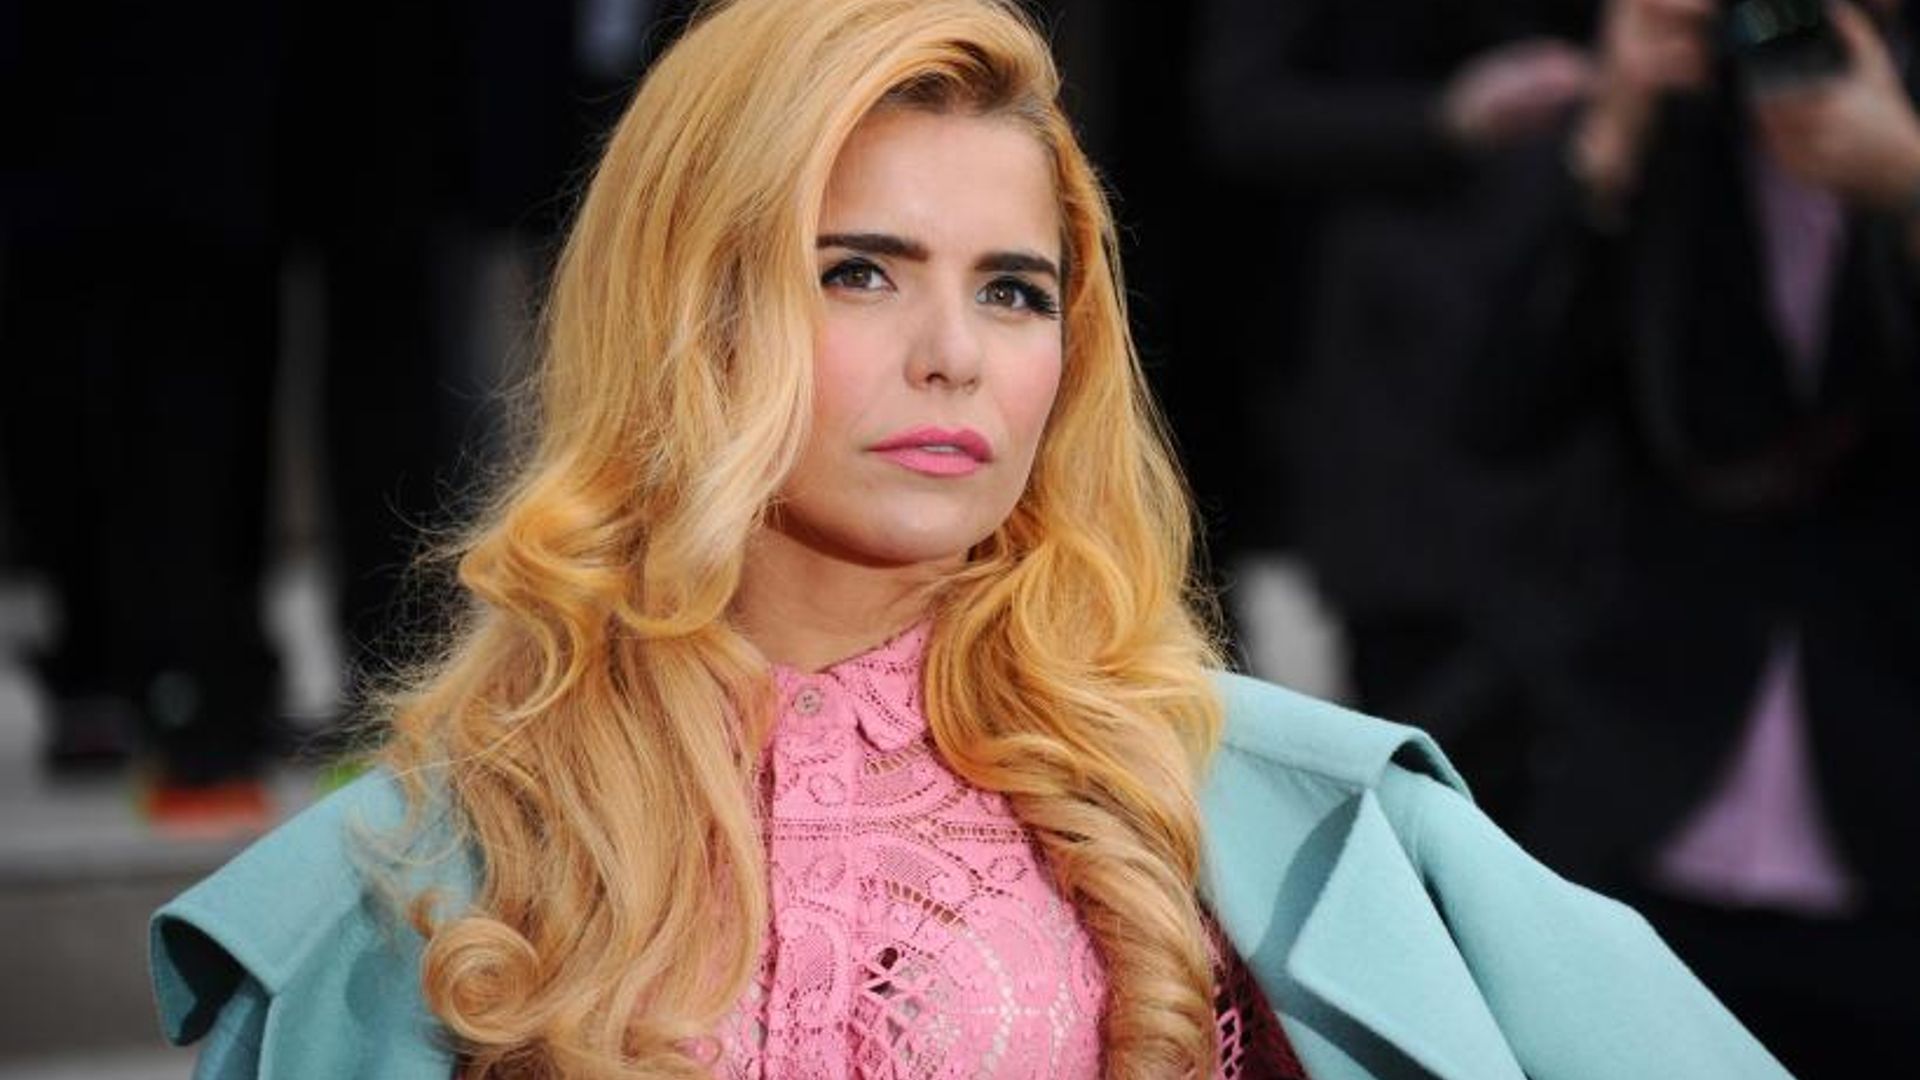 Paloma Faith opens up about difficult birth: 'Everything that could go wrong went wrong'